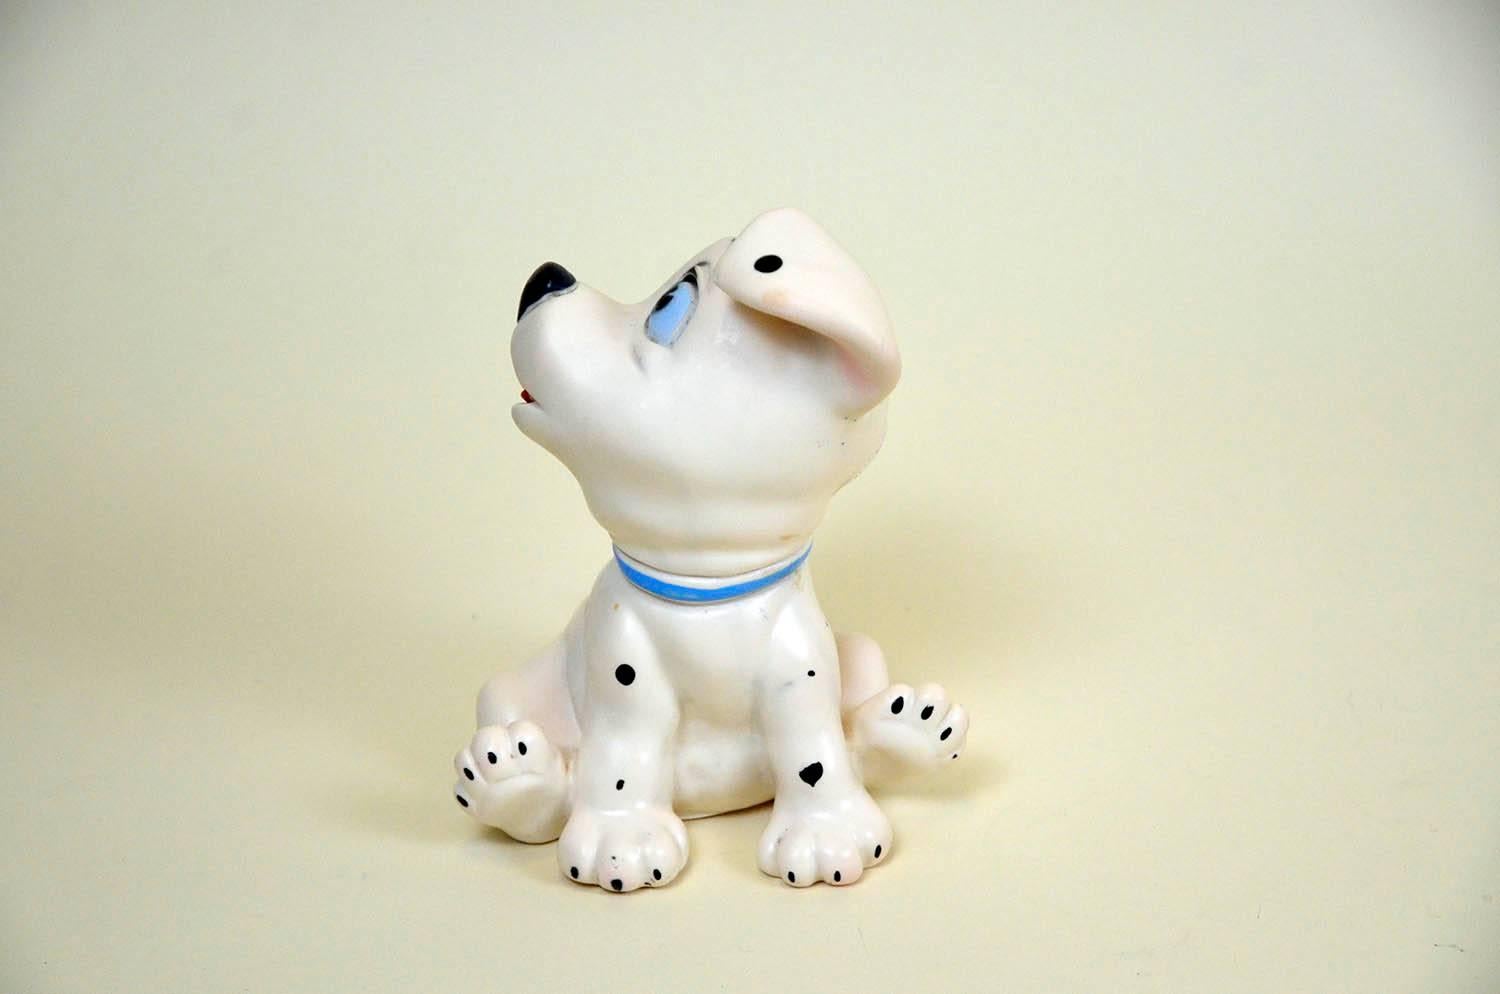 Mid-Century Modern 1960s Vintage Original Disney One Hundred and One Dalmatians Rubber Squeak Toy